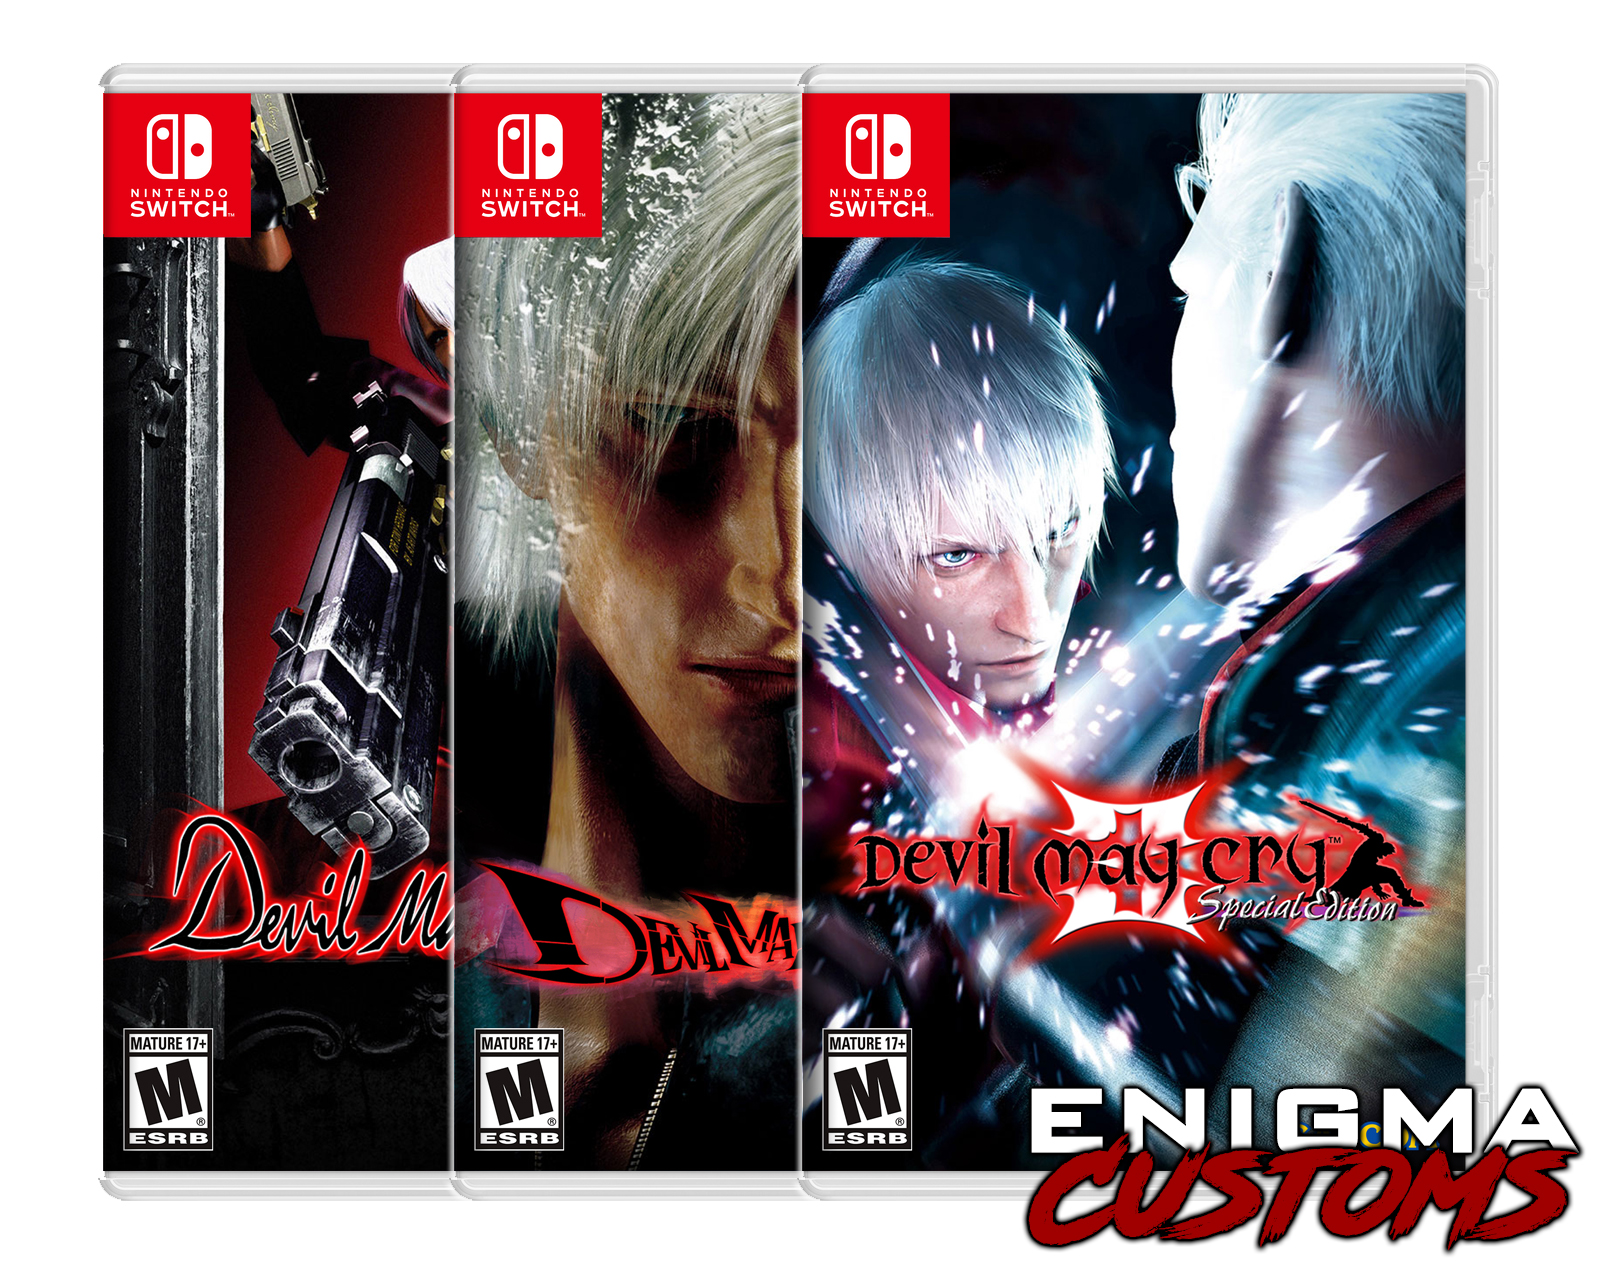 Devil May Cry 3 Special Edition for Switch to include “a little